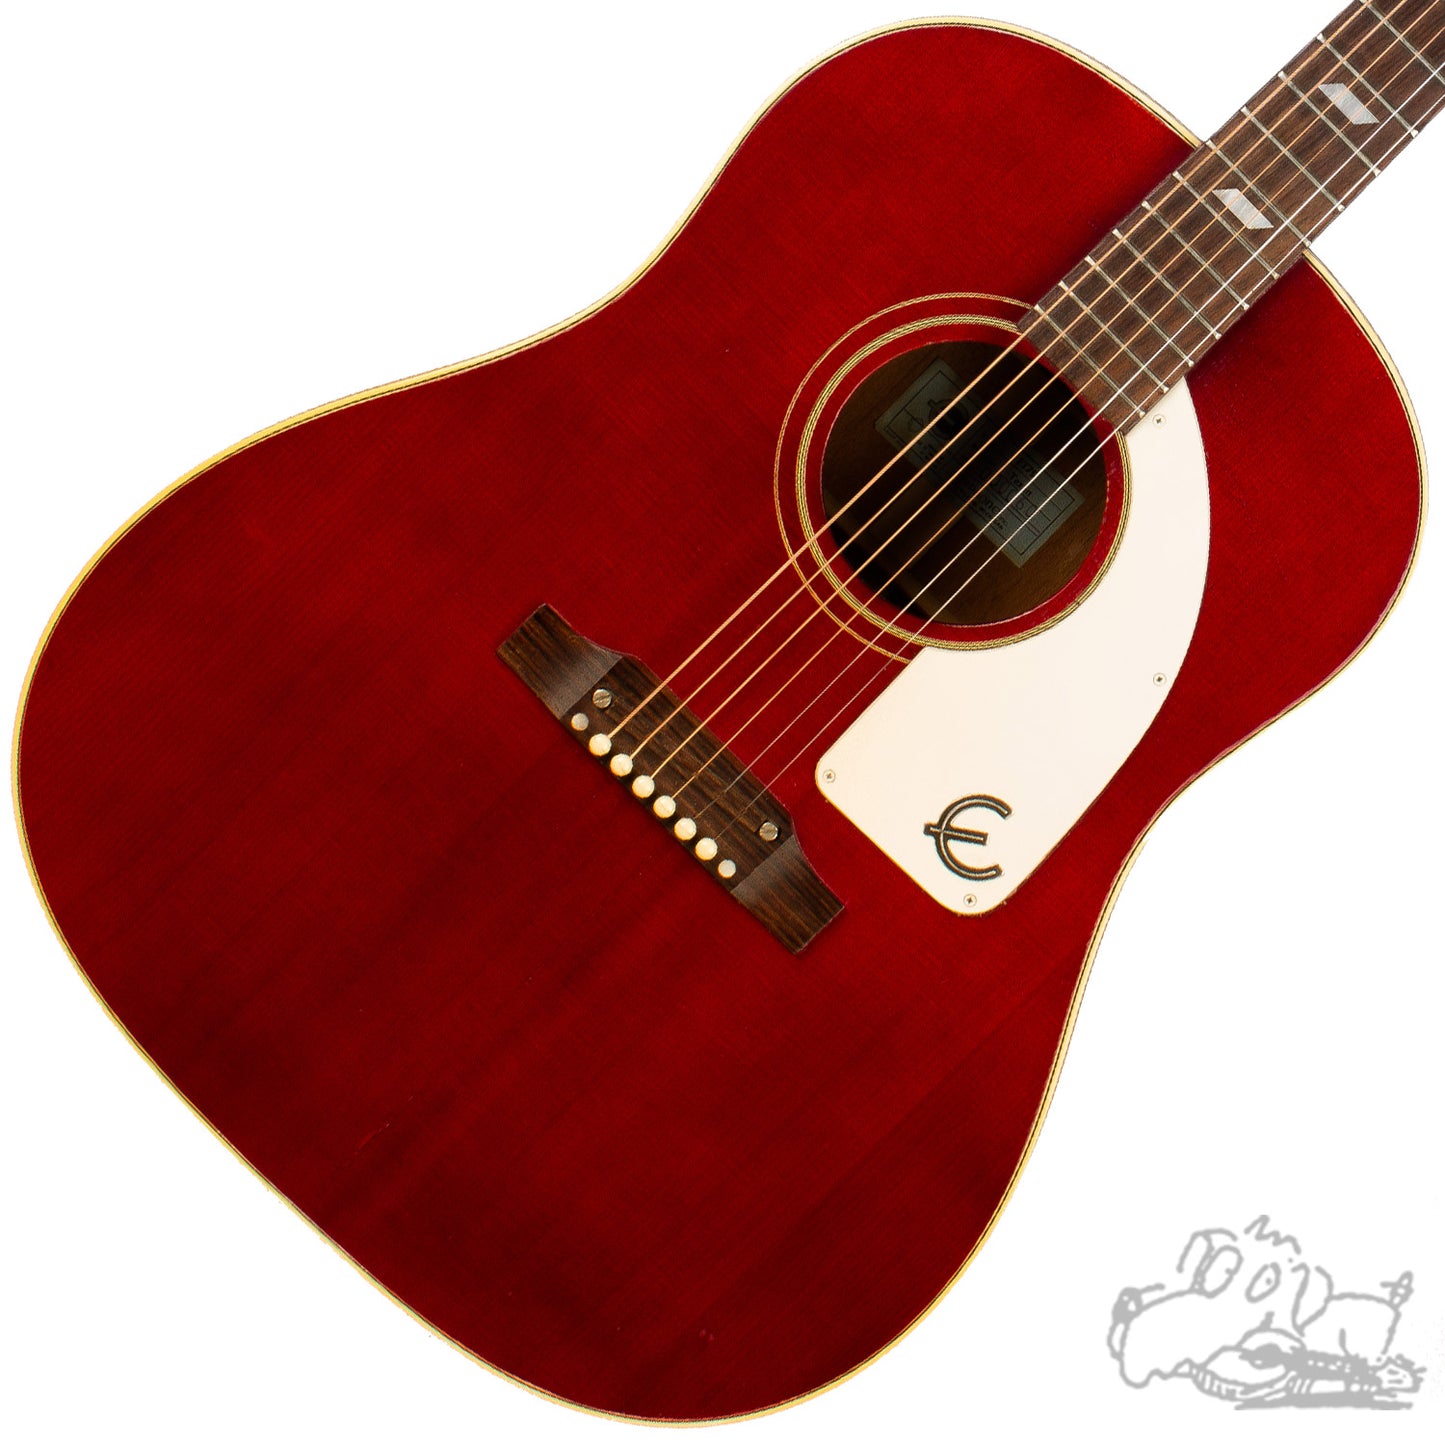 1968 Epiphone FT-79 Texan in Vintage Cherry